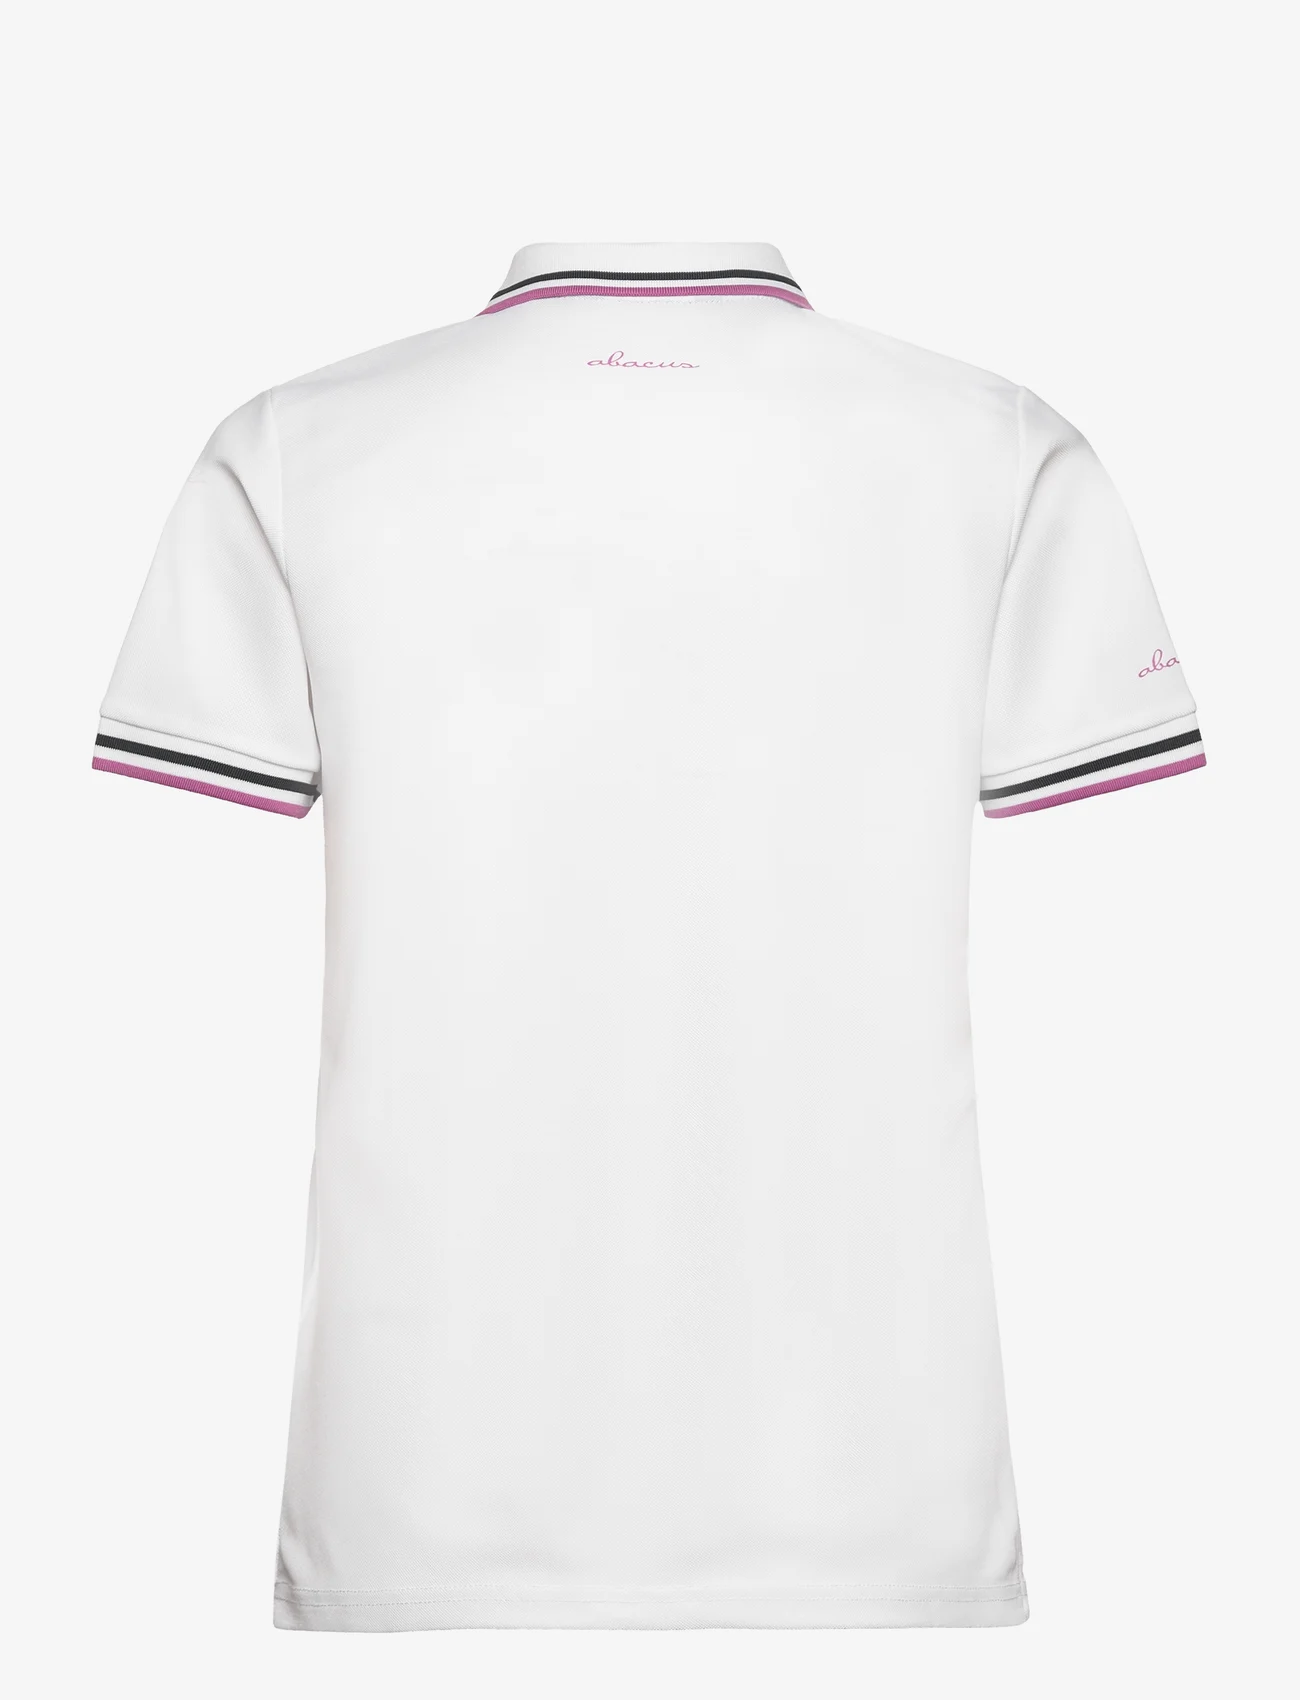 Abacus - Lds Pines polo - poloshirts - white - 1